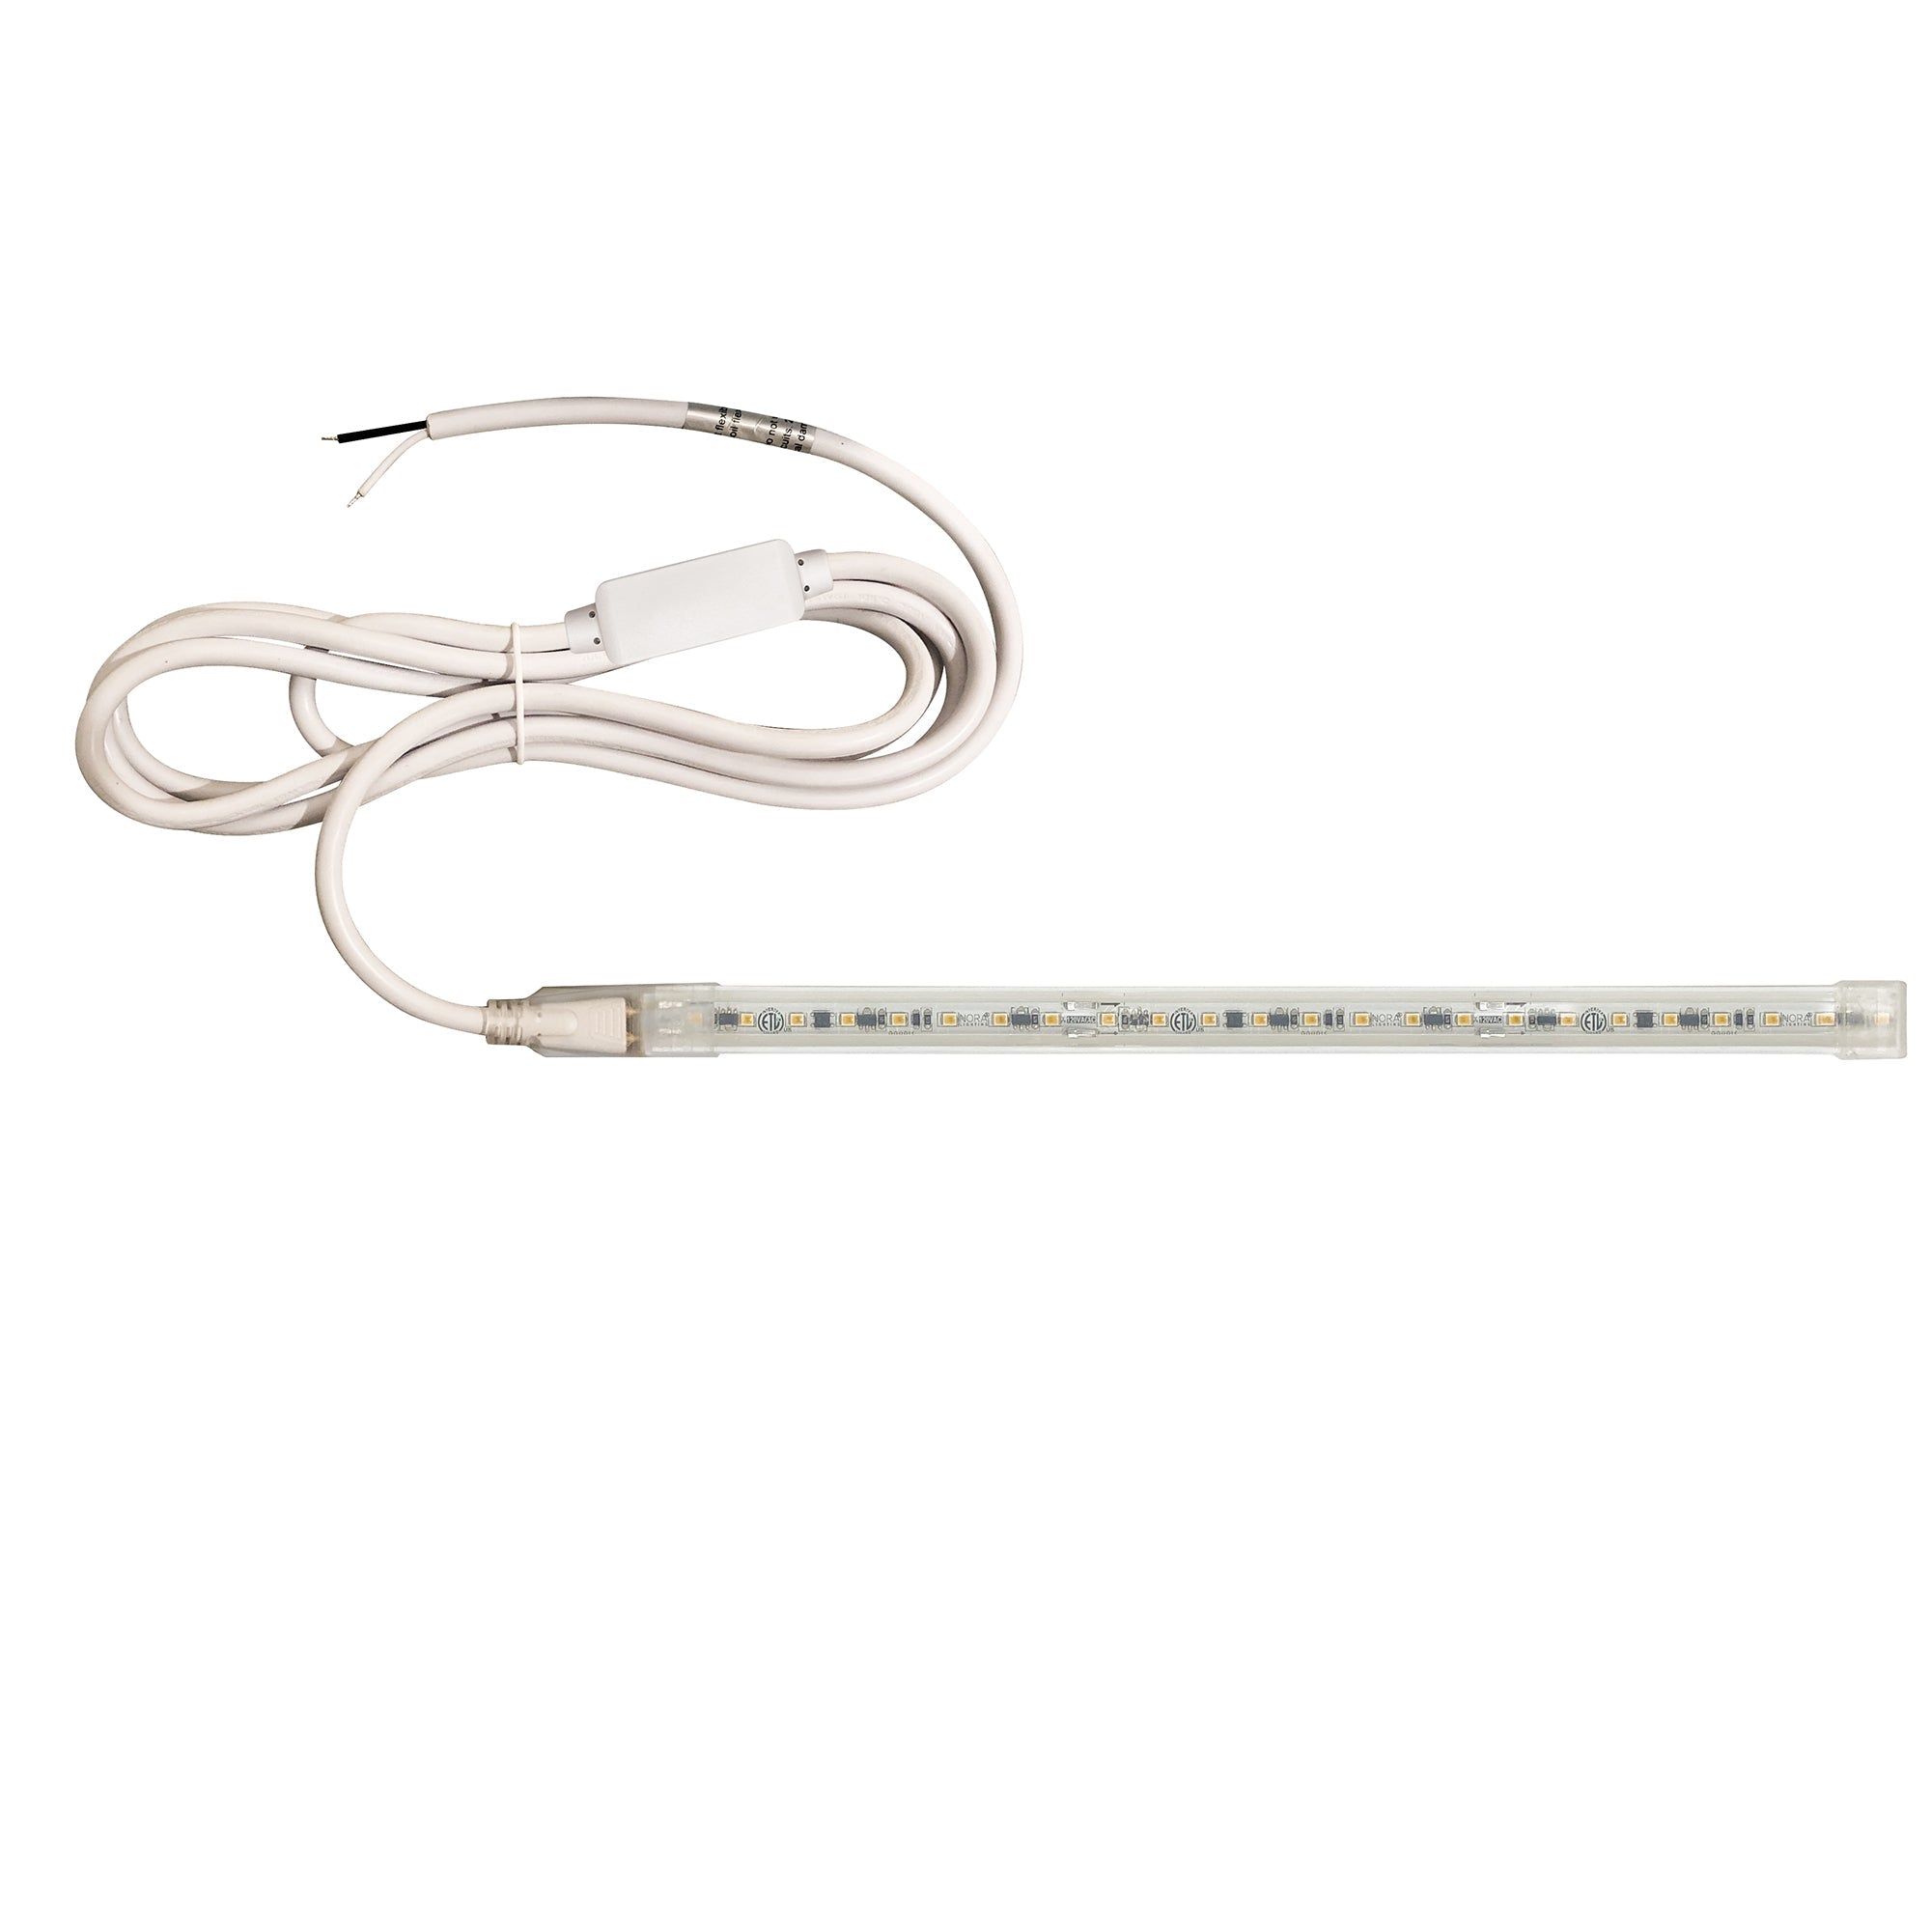 Nora Lighting NUTP13-W94-8-12-930/HWSP - Accent / Undercabinet - Custom Cut 94-ft, 8-in 120V Continuous LED Tape Light, 330lm / 3.6W per foot, 3000K, w/ Mounting Clips and 8' Hardwired Power Cord w/ Surge Protector